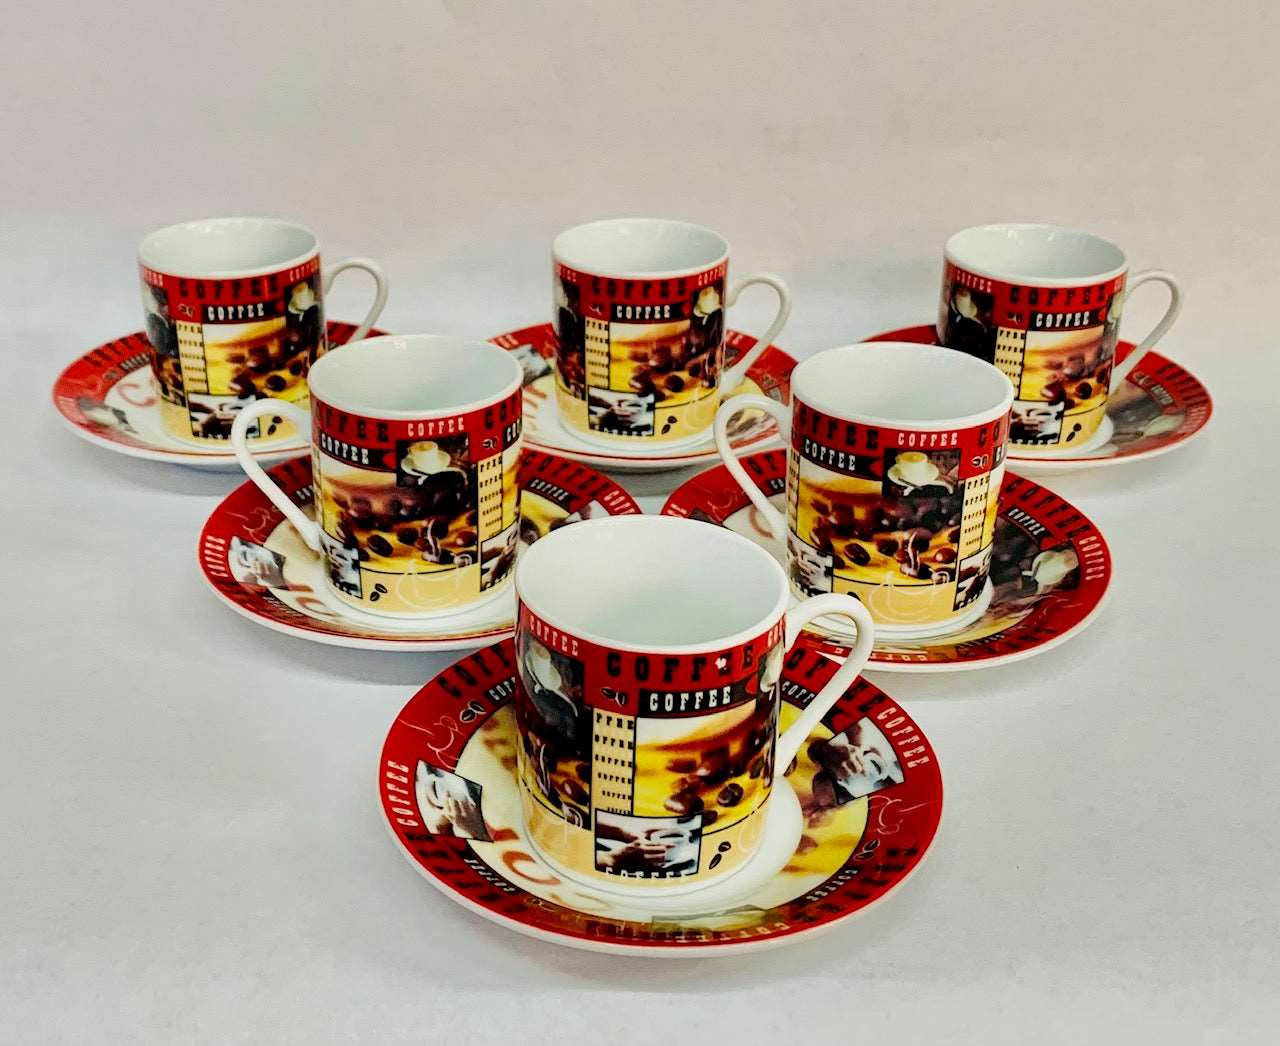 Espresso 6 cups & 6 saucers, Made from porcelain - Royal Gift